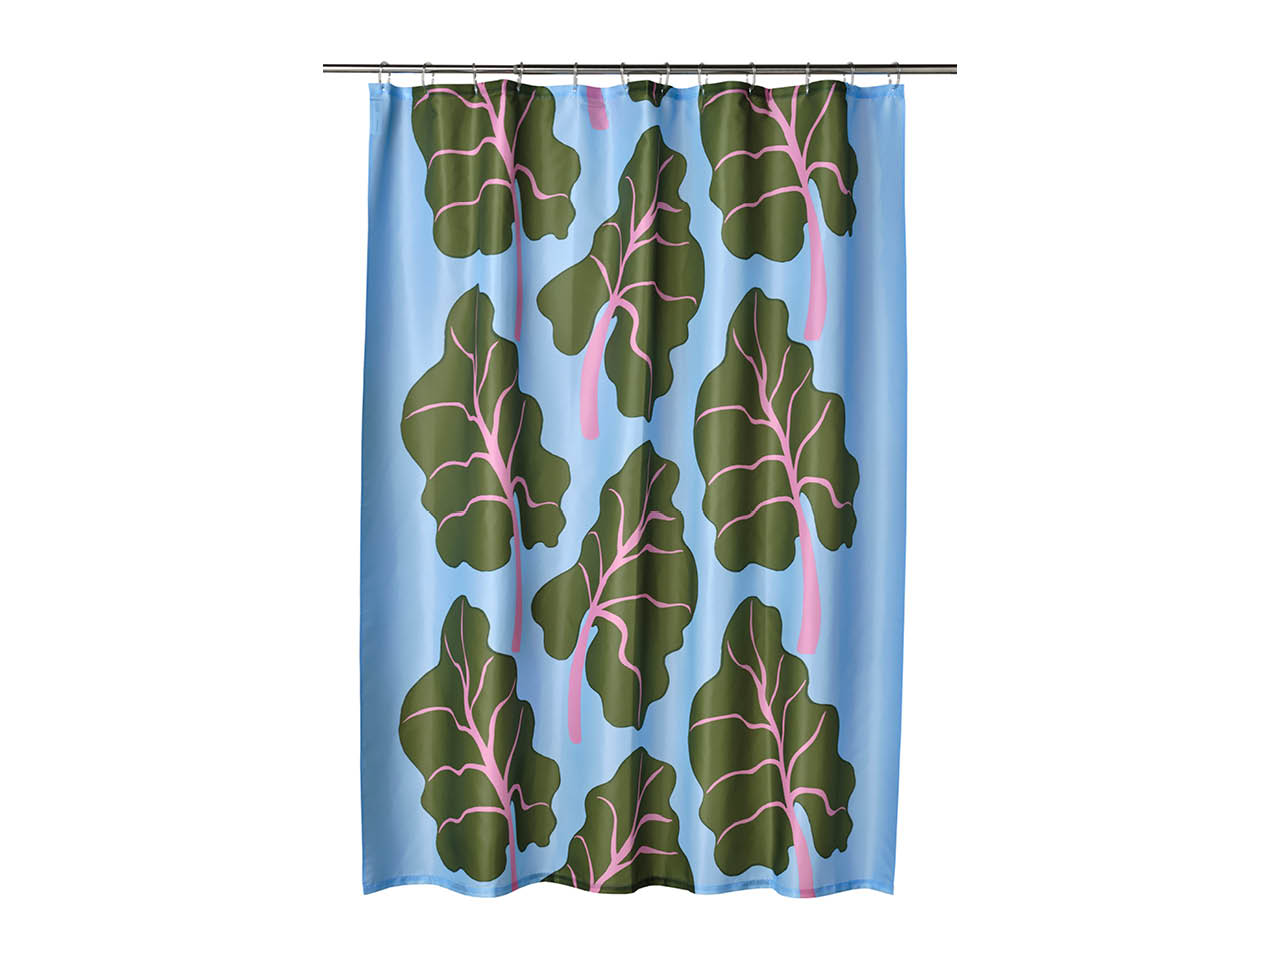 blue shower curtain printed with green and pink rhubarb leaves on white background 